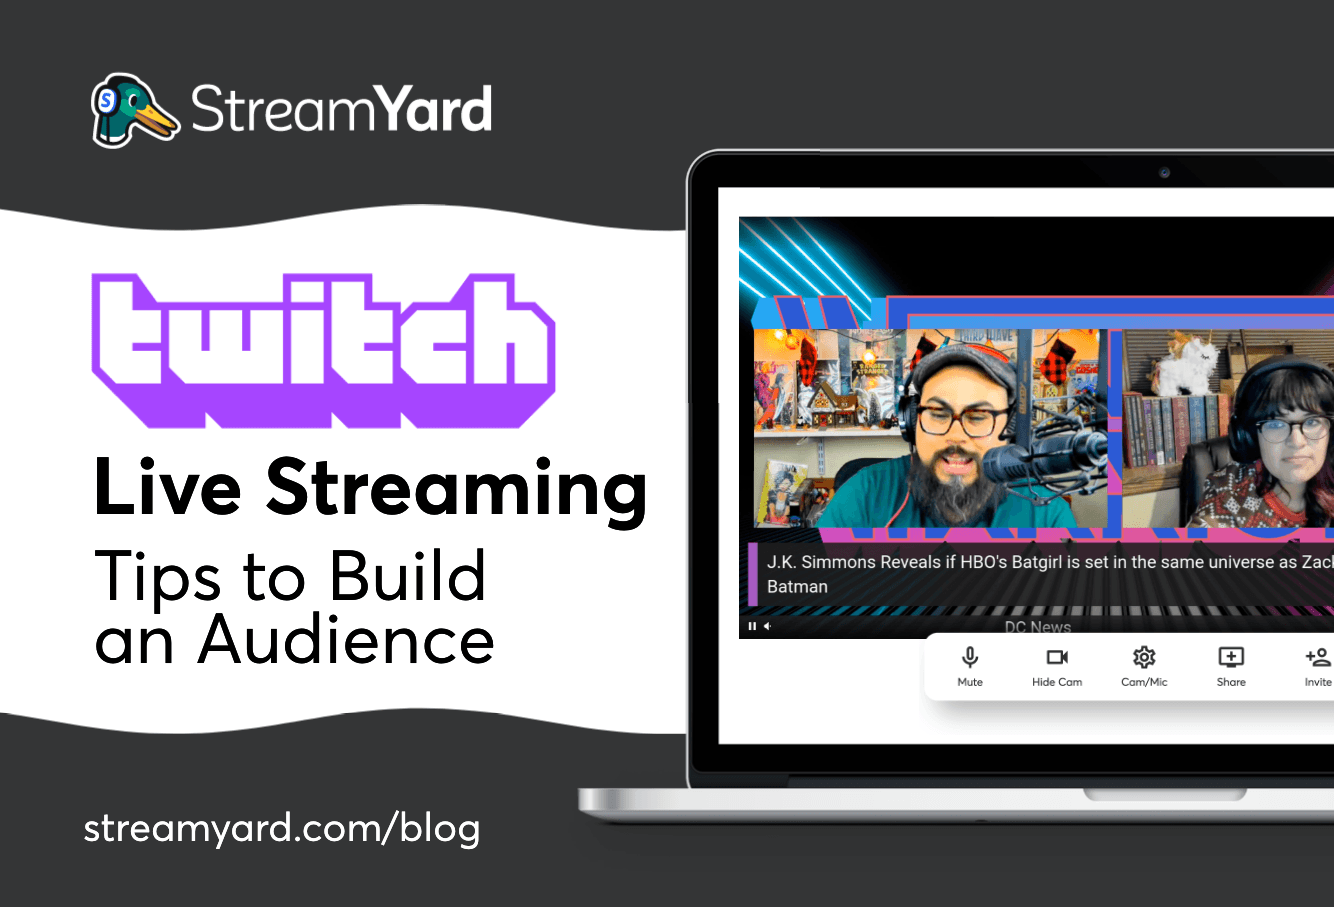 Twitch offers an incredible opportunity to build an audience and nurture your community. Here are the top Twitch live streaming tips to make the most of your live broadcasts on the platform.